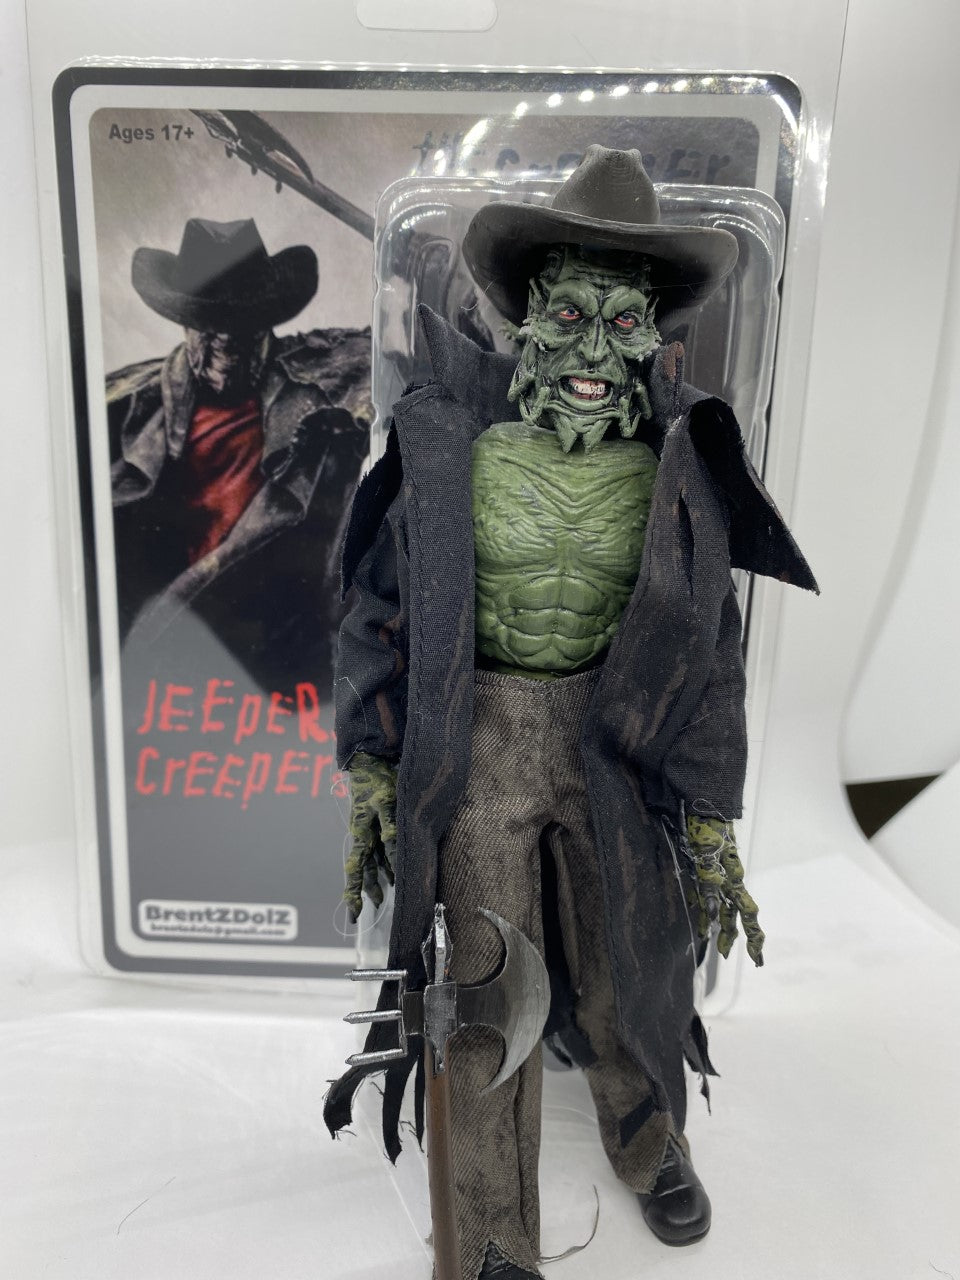 Brentz Dolz Jeepers Creepers - The Creeper 8" Action Figure